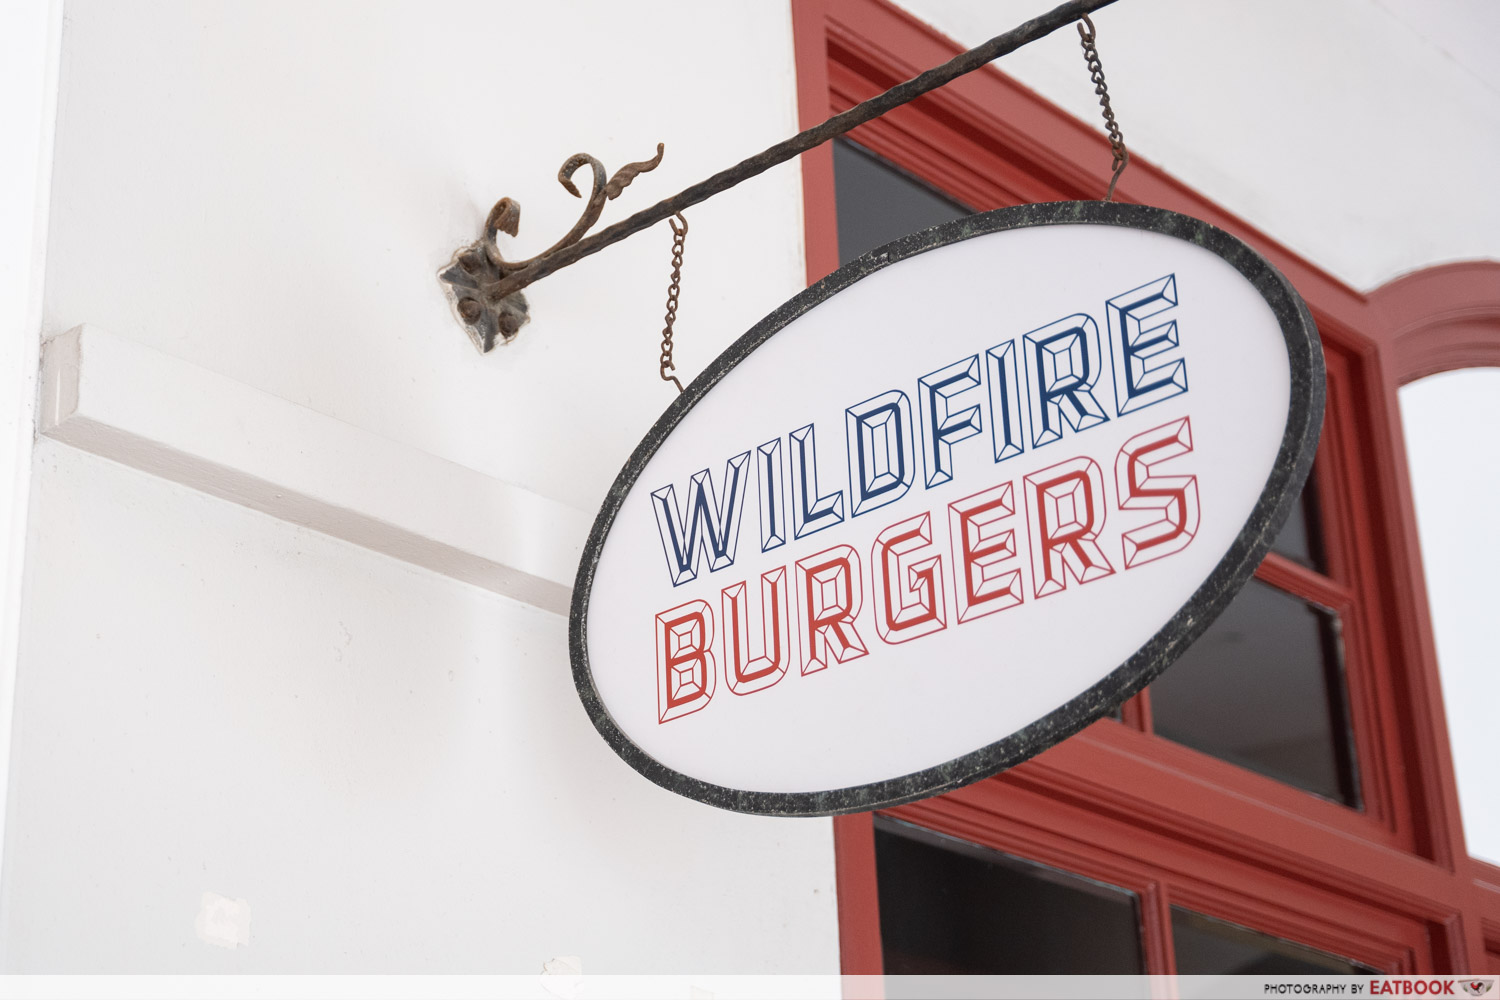 Wildfire-Burgers-storefront-sign